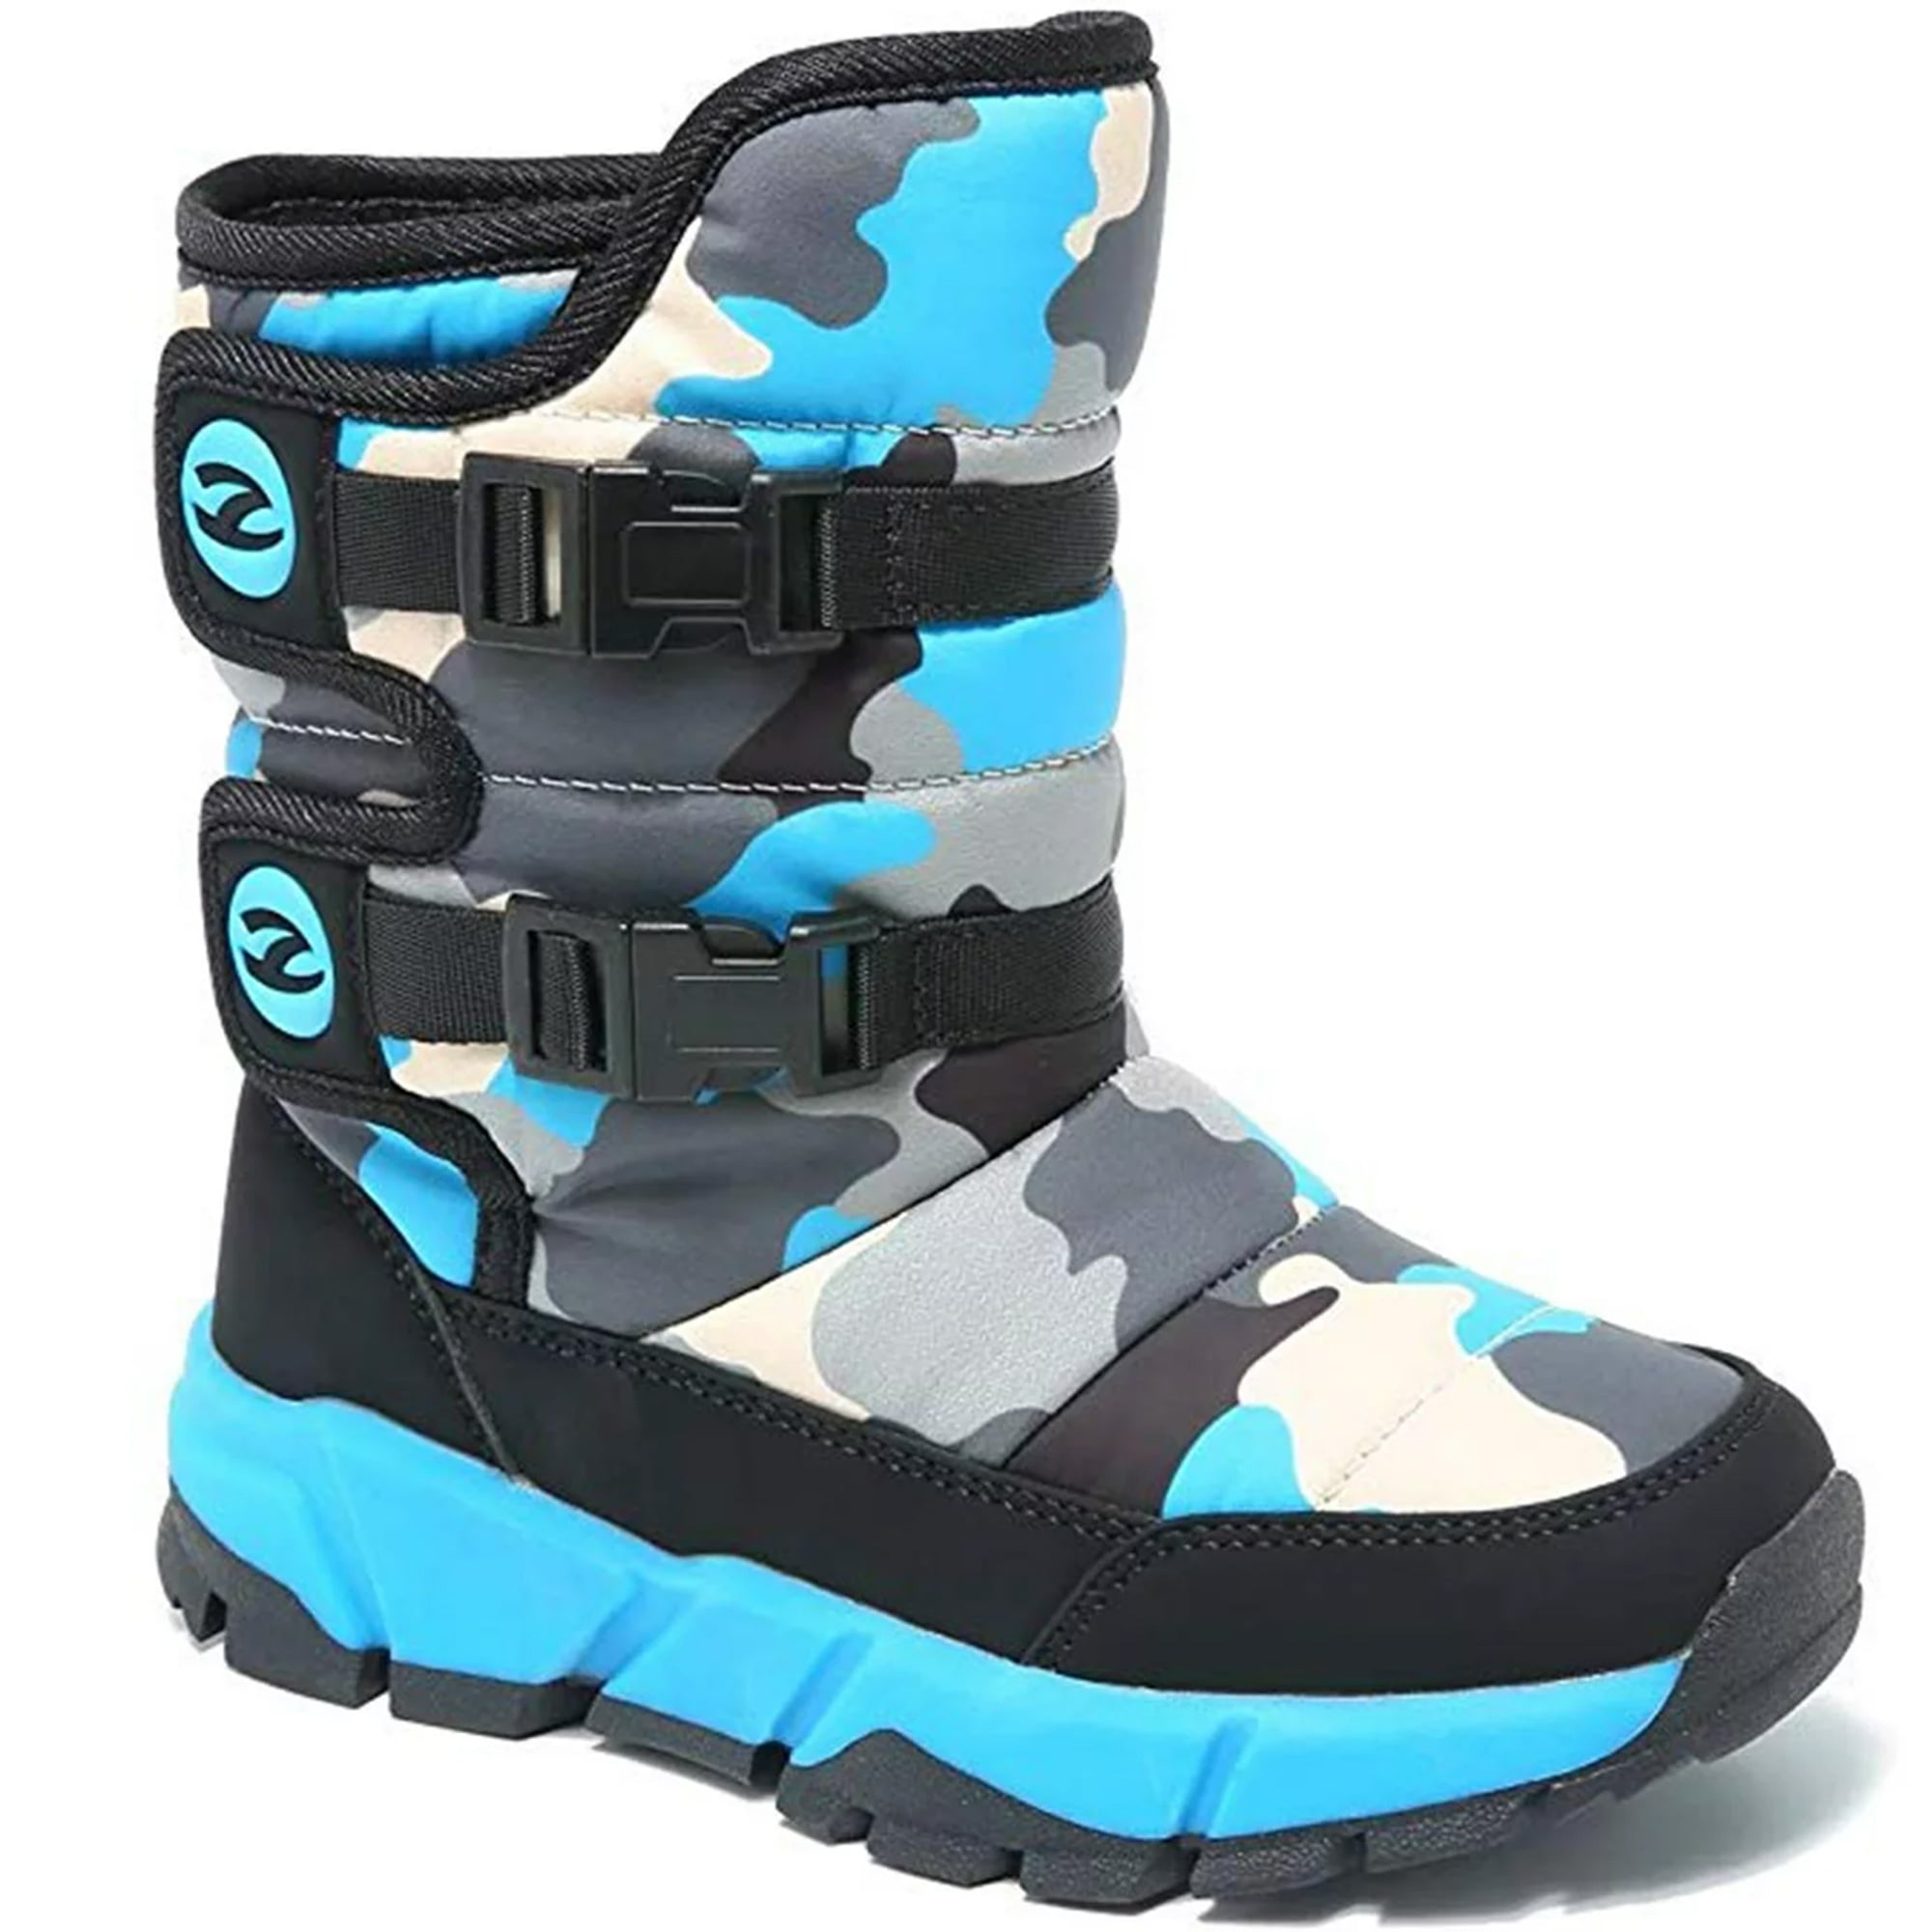 Tanleewa Boys and Girls Snow Boots Fur Lined Winter Boots for Child ...